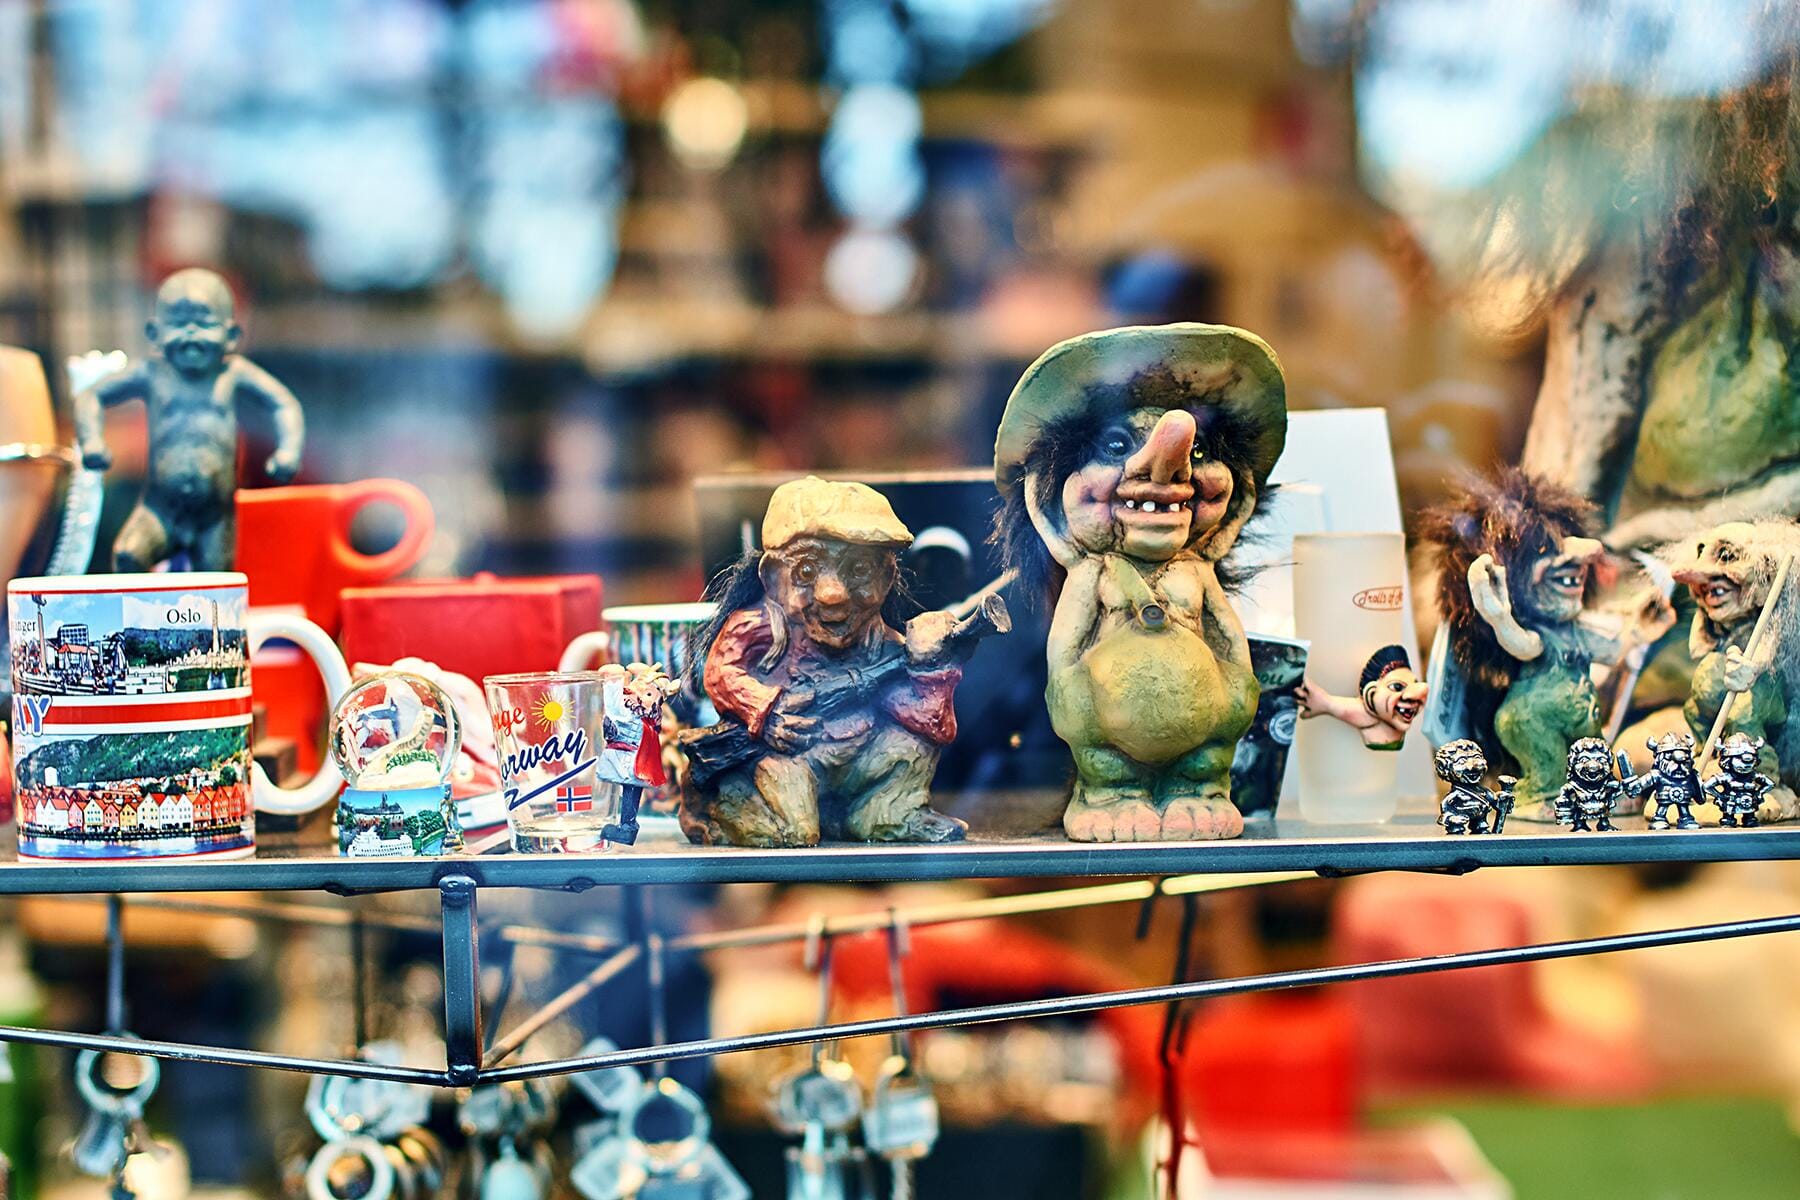 The Best Souvenirs to Buy Norway